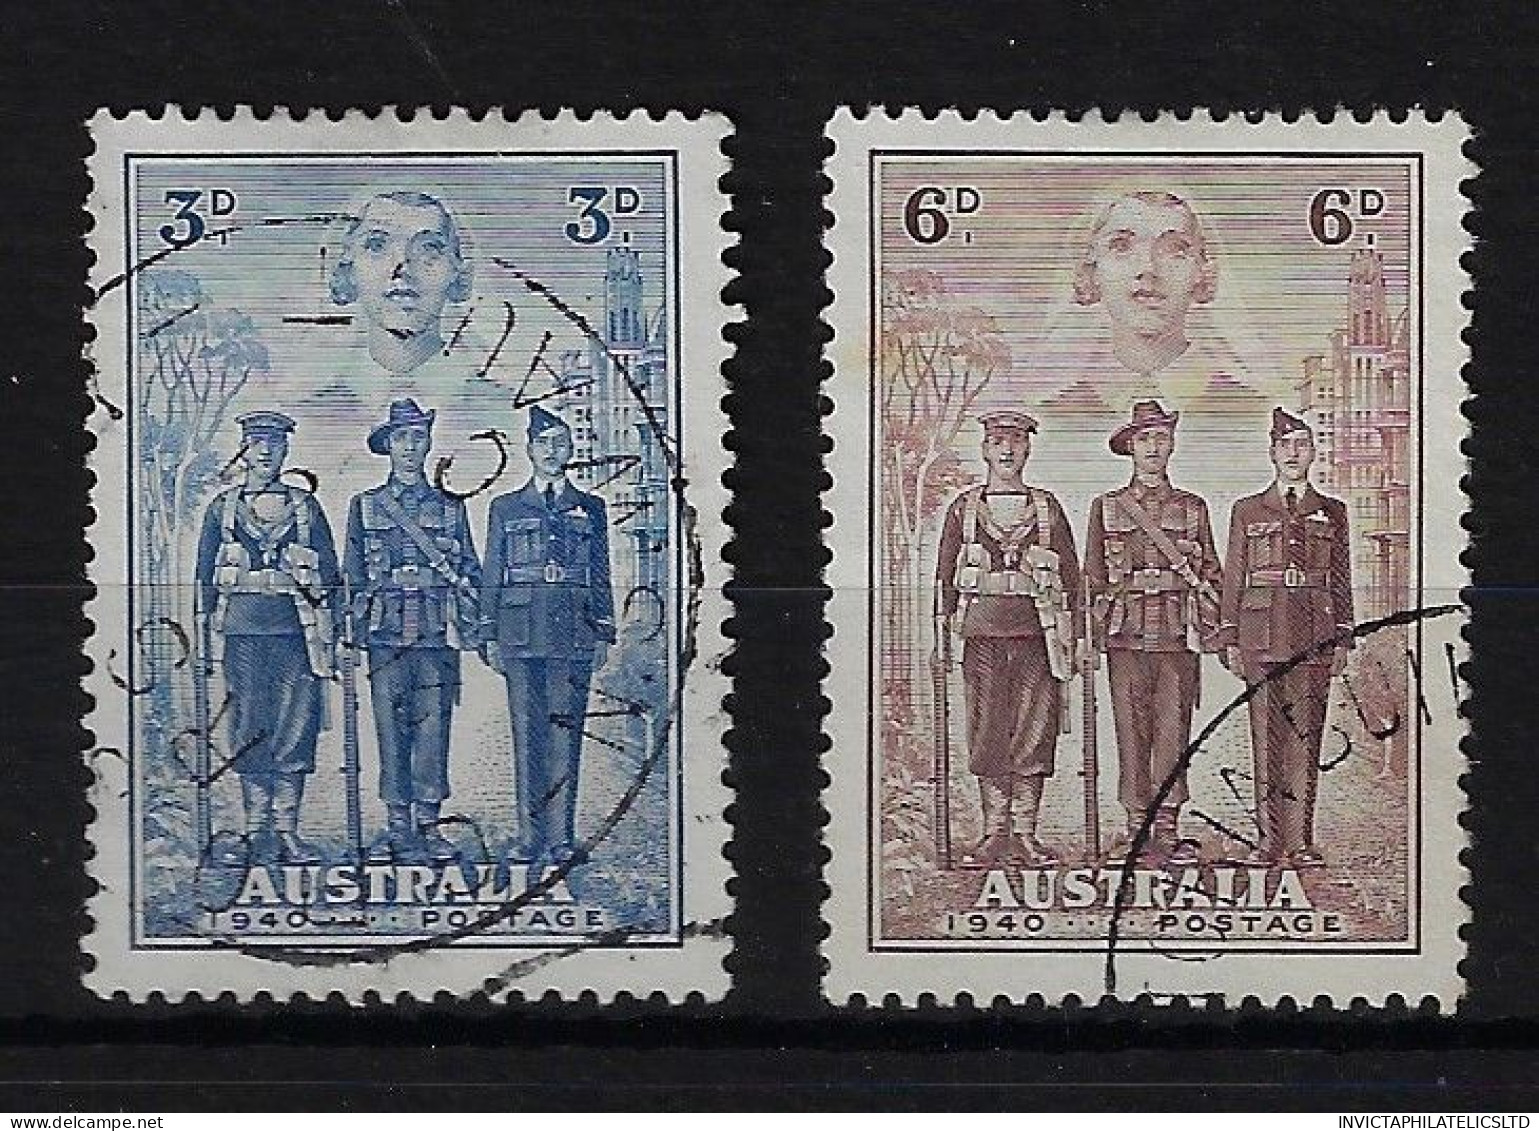 AUSTRALIA SG198/9, 3D +6D ARMED FORCES, FINE USED - Gebraucht